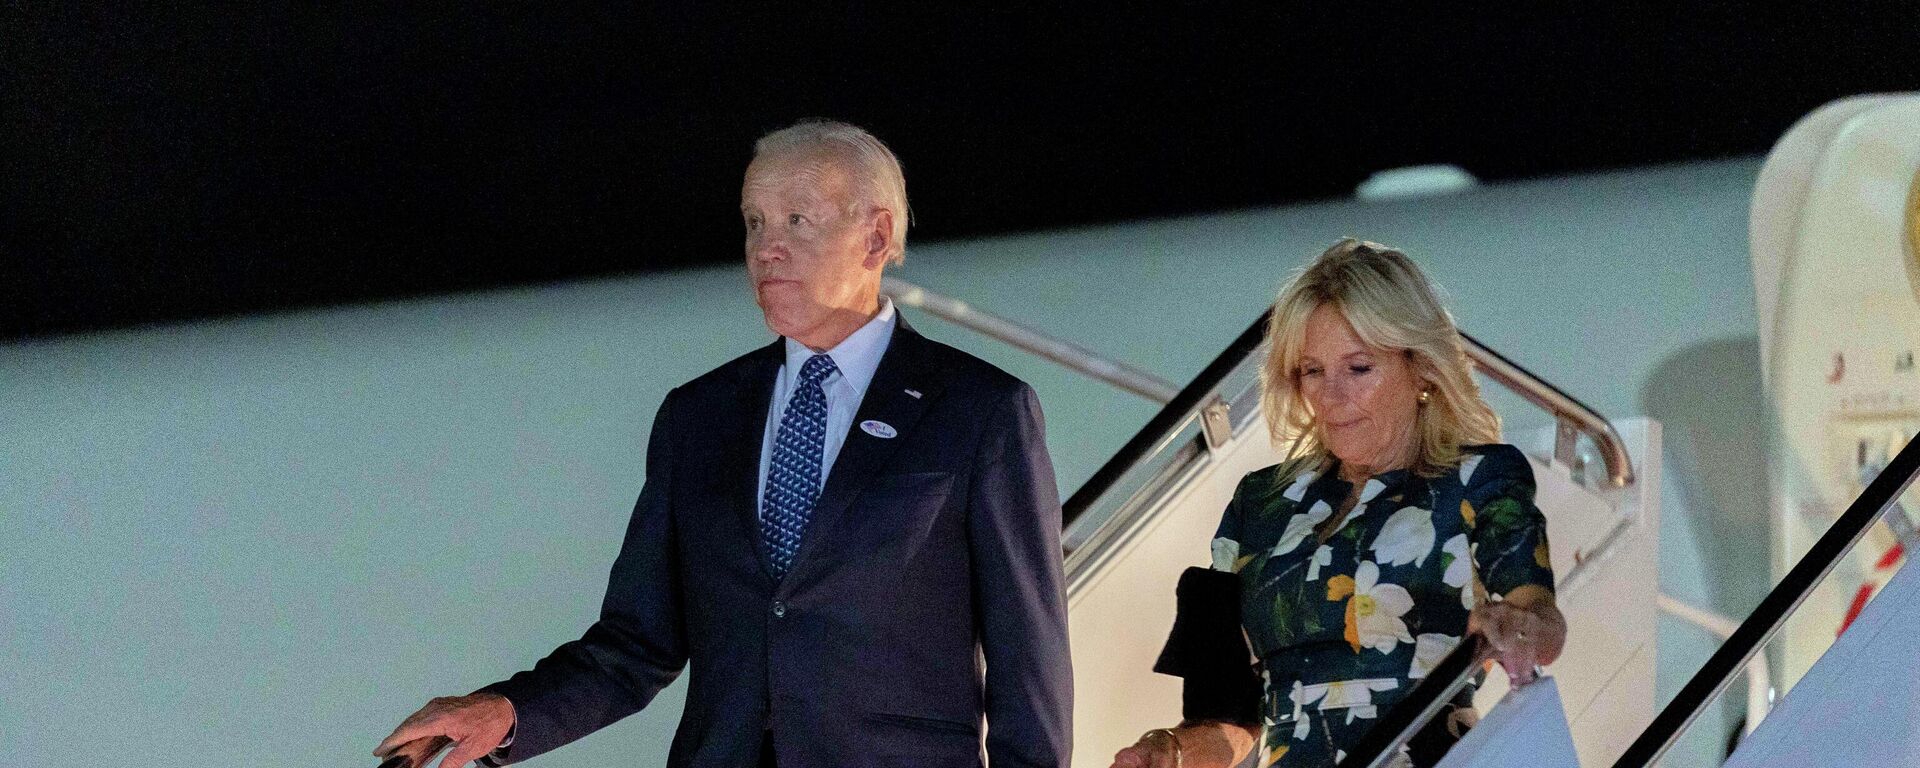 President Joe Biden and first lady Jill Biden arrive at Andrews Air Force Base, Md., Tuesday, Sept. 13, 2022, after voting in the Delaware primary. - Sputnik International, 1920, 25.09.2022